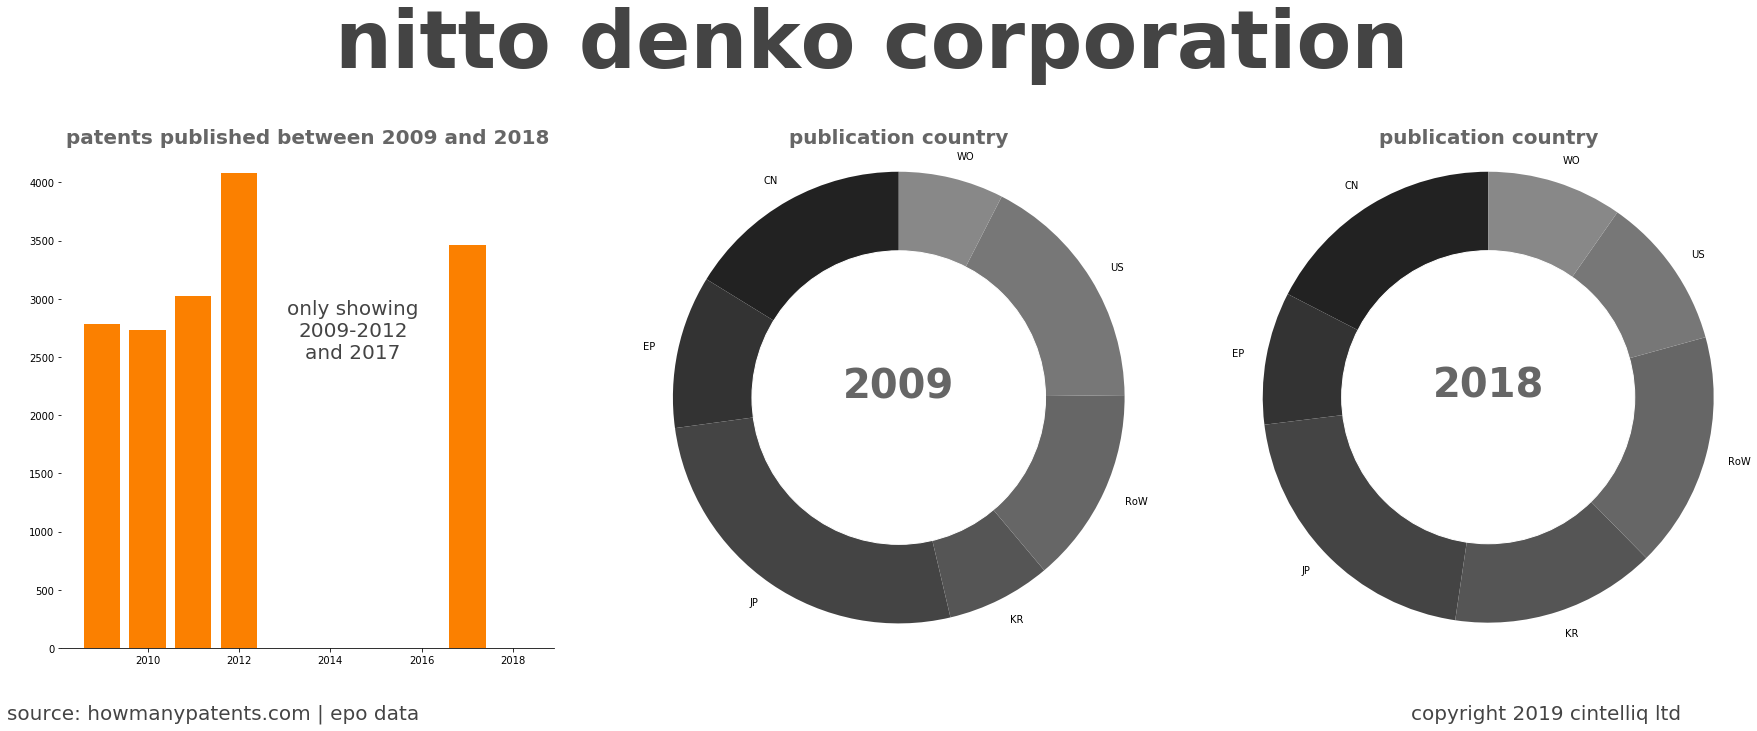 summary of patents for Nitto Denko Corporation